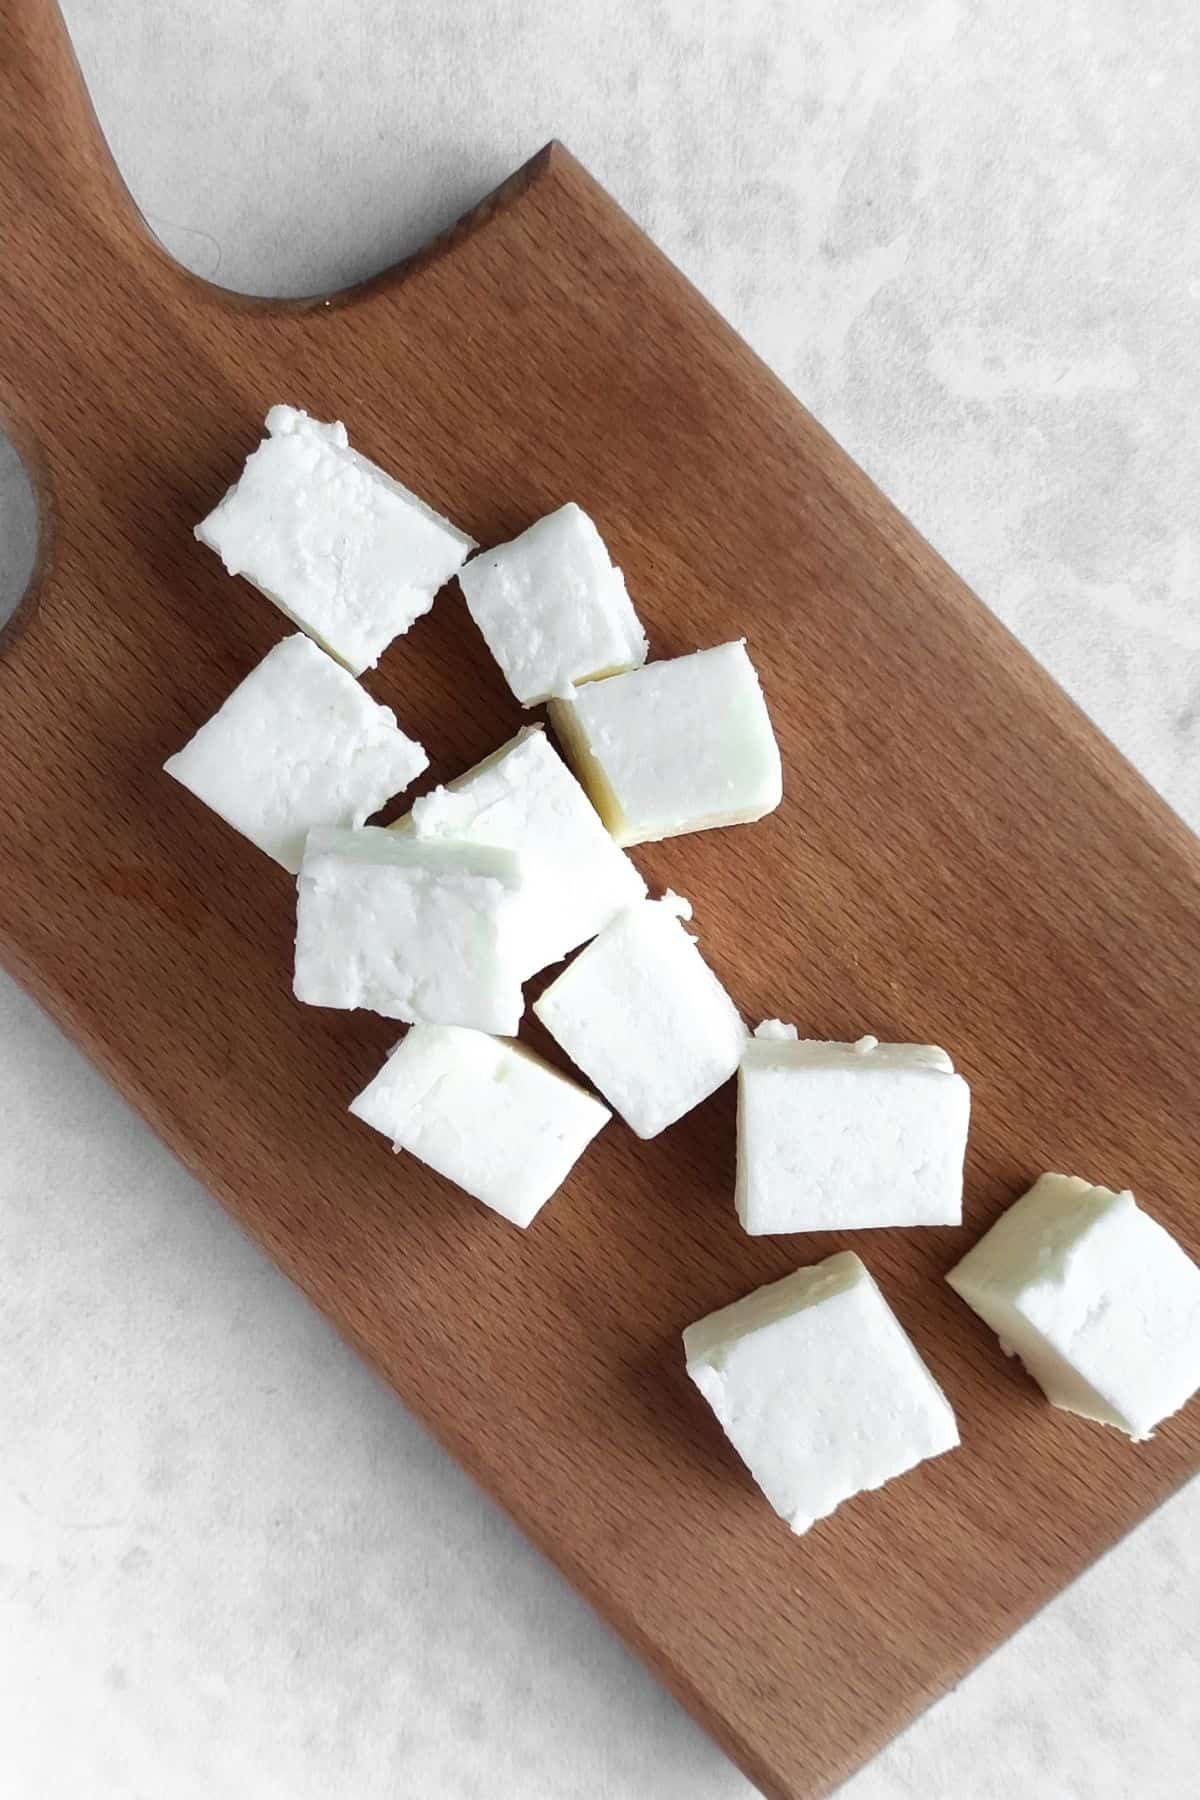 Cubes of feta cheese sitting on a wooden cutting board.